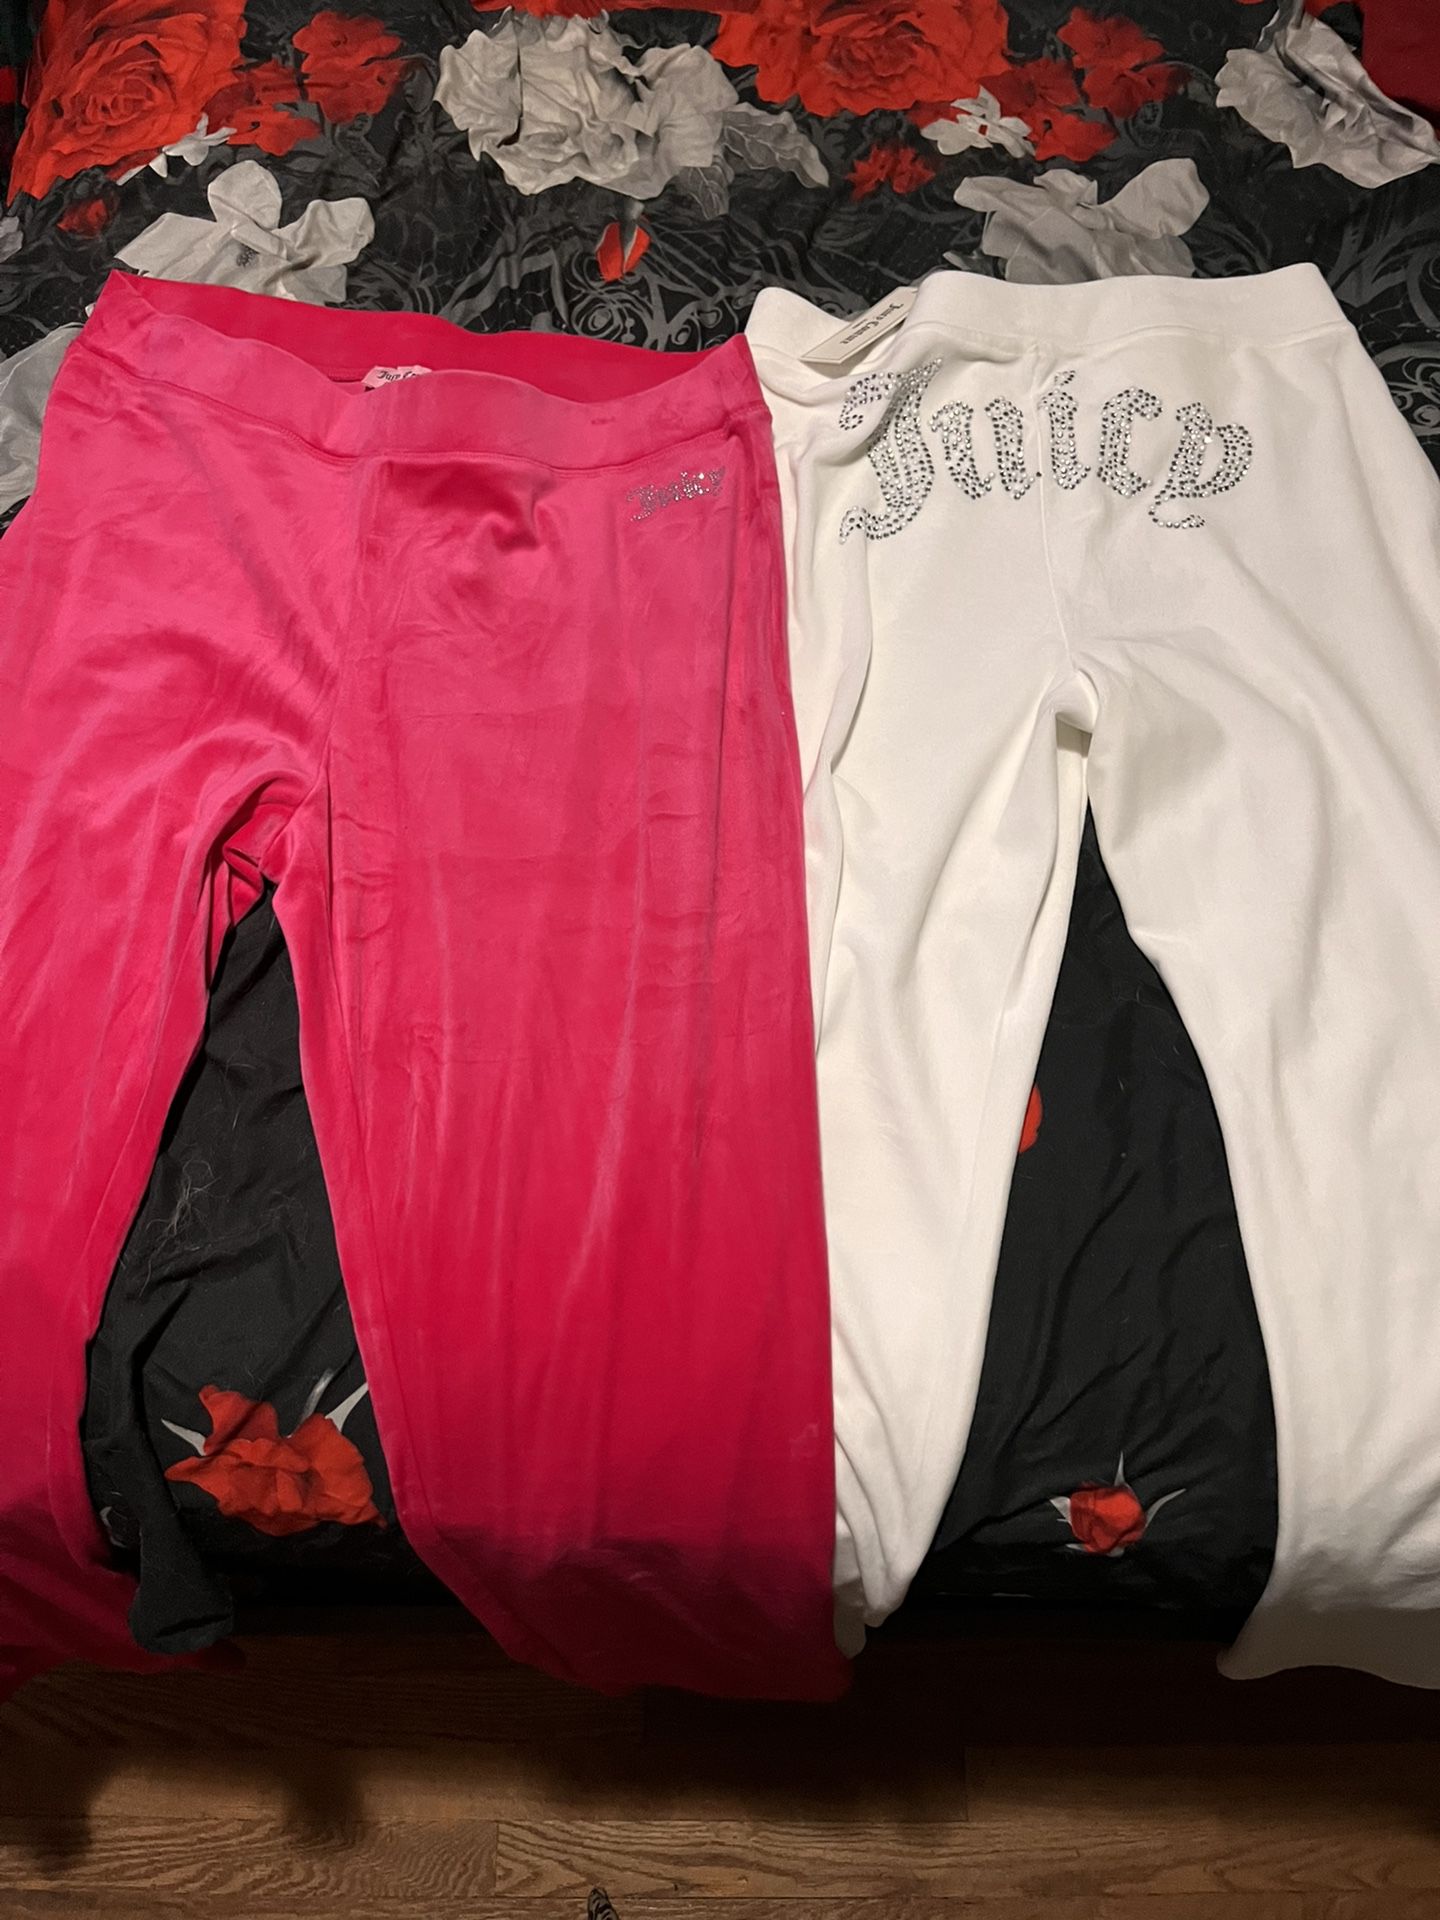 Womens juicy couture pants u get both cheap deal!!!!!